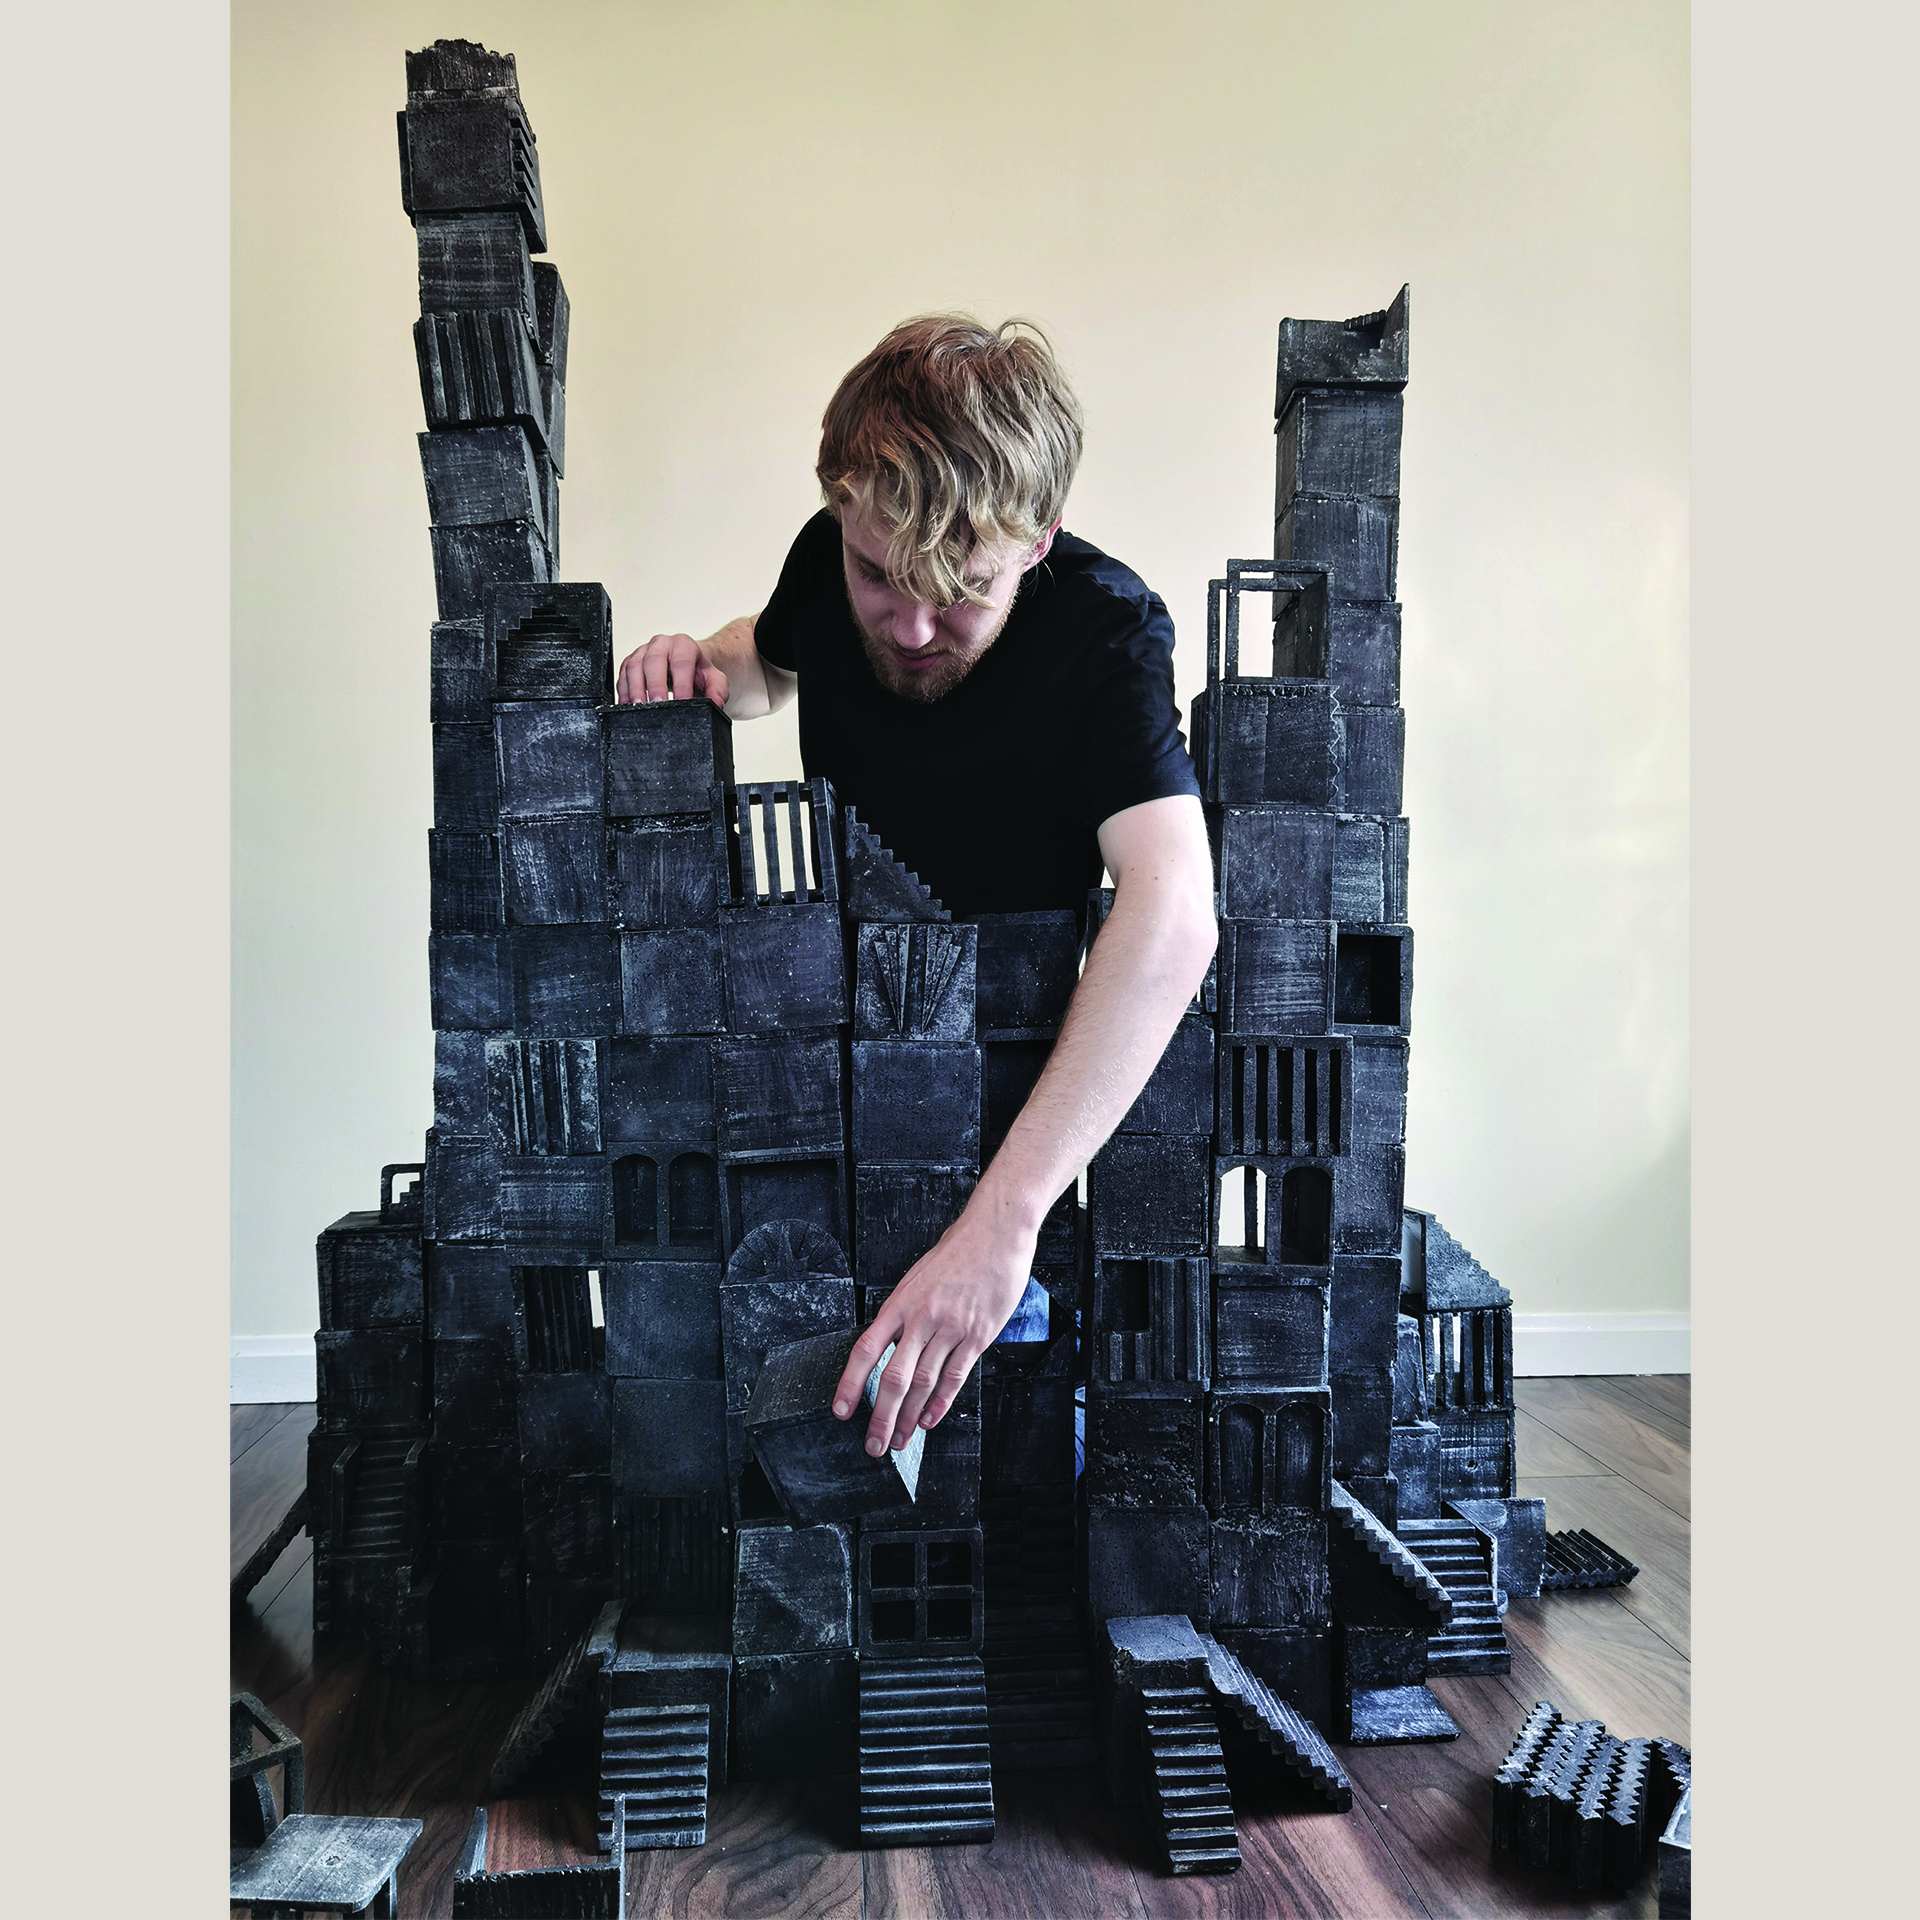 A person indoors, building a structure from grey blocks.